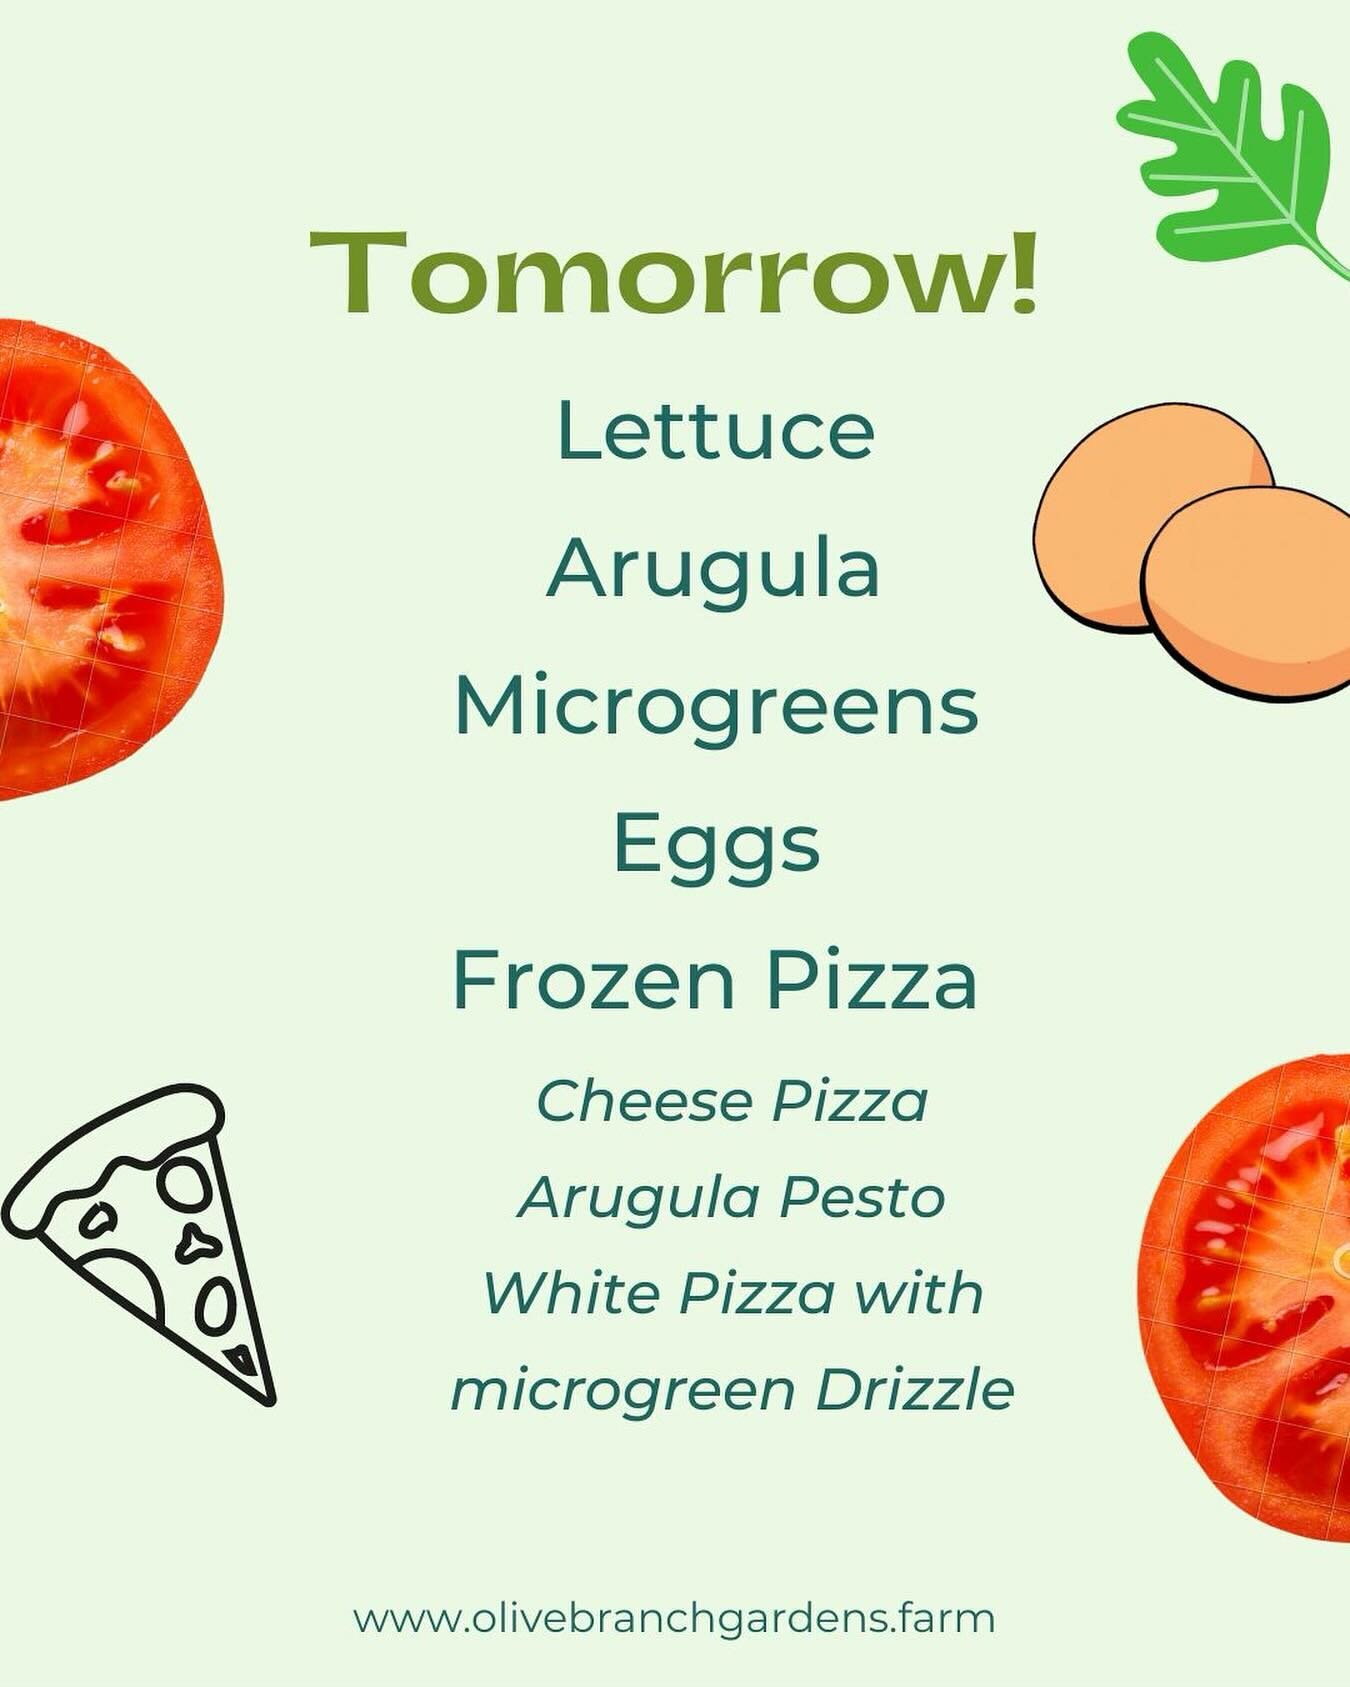 Fresh greens are available! Make sure you visit us at the market tomorrow! We will be there at 9am! 
.
.
Large variety of Microgreens, lettuce, arugula, eggs and frozen pizza! We are debuting a new flavor. White sauce with a microgreen pesto drizzle!